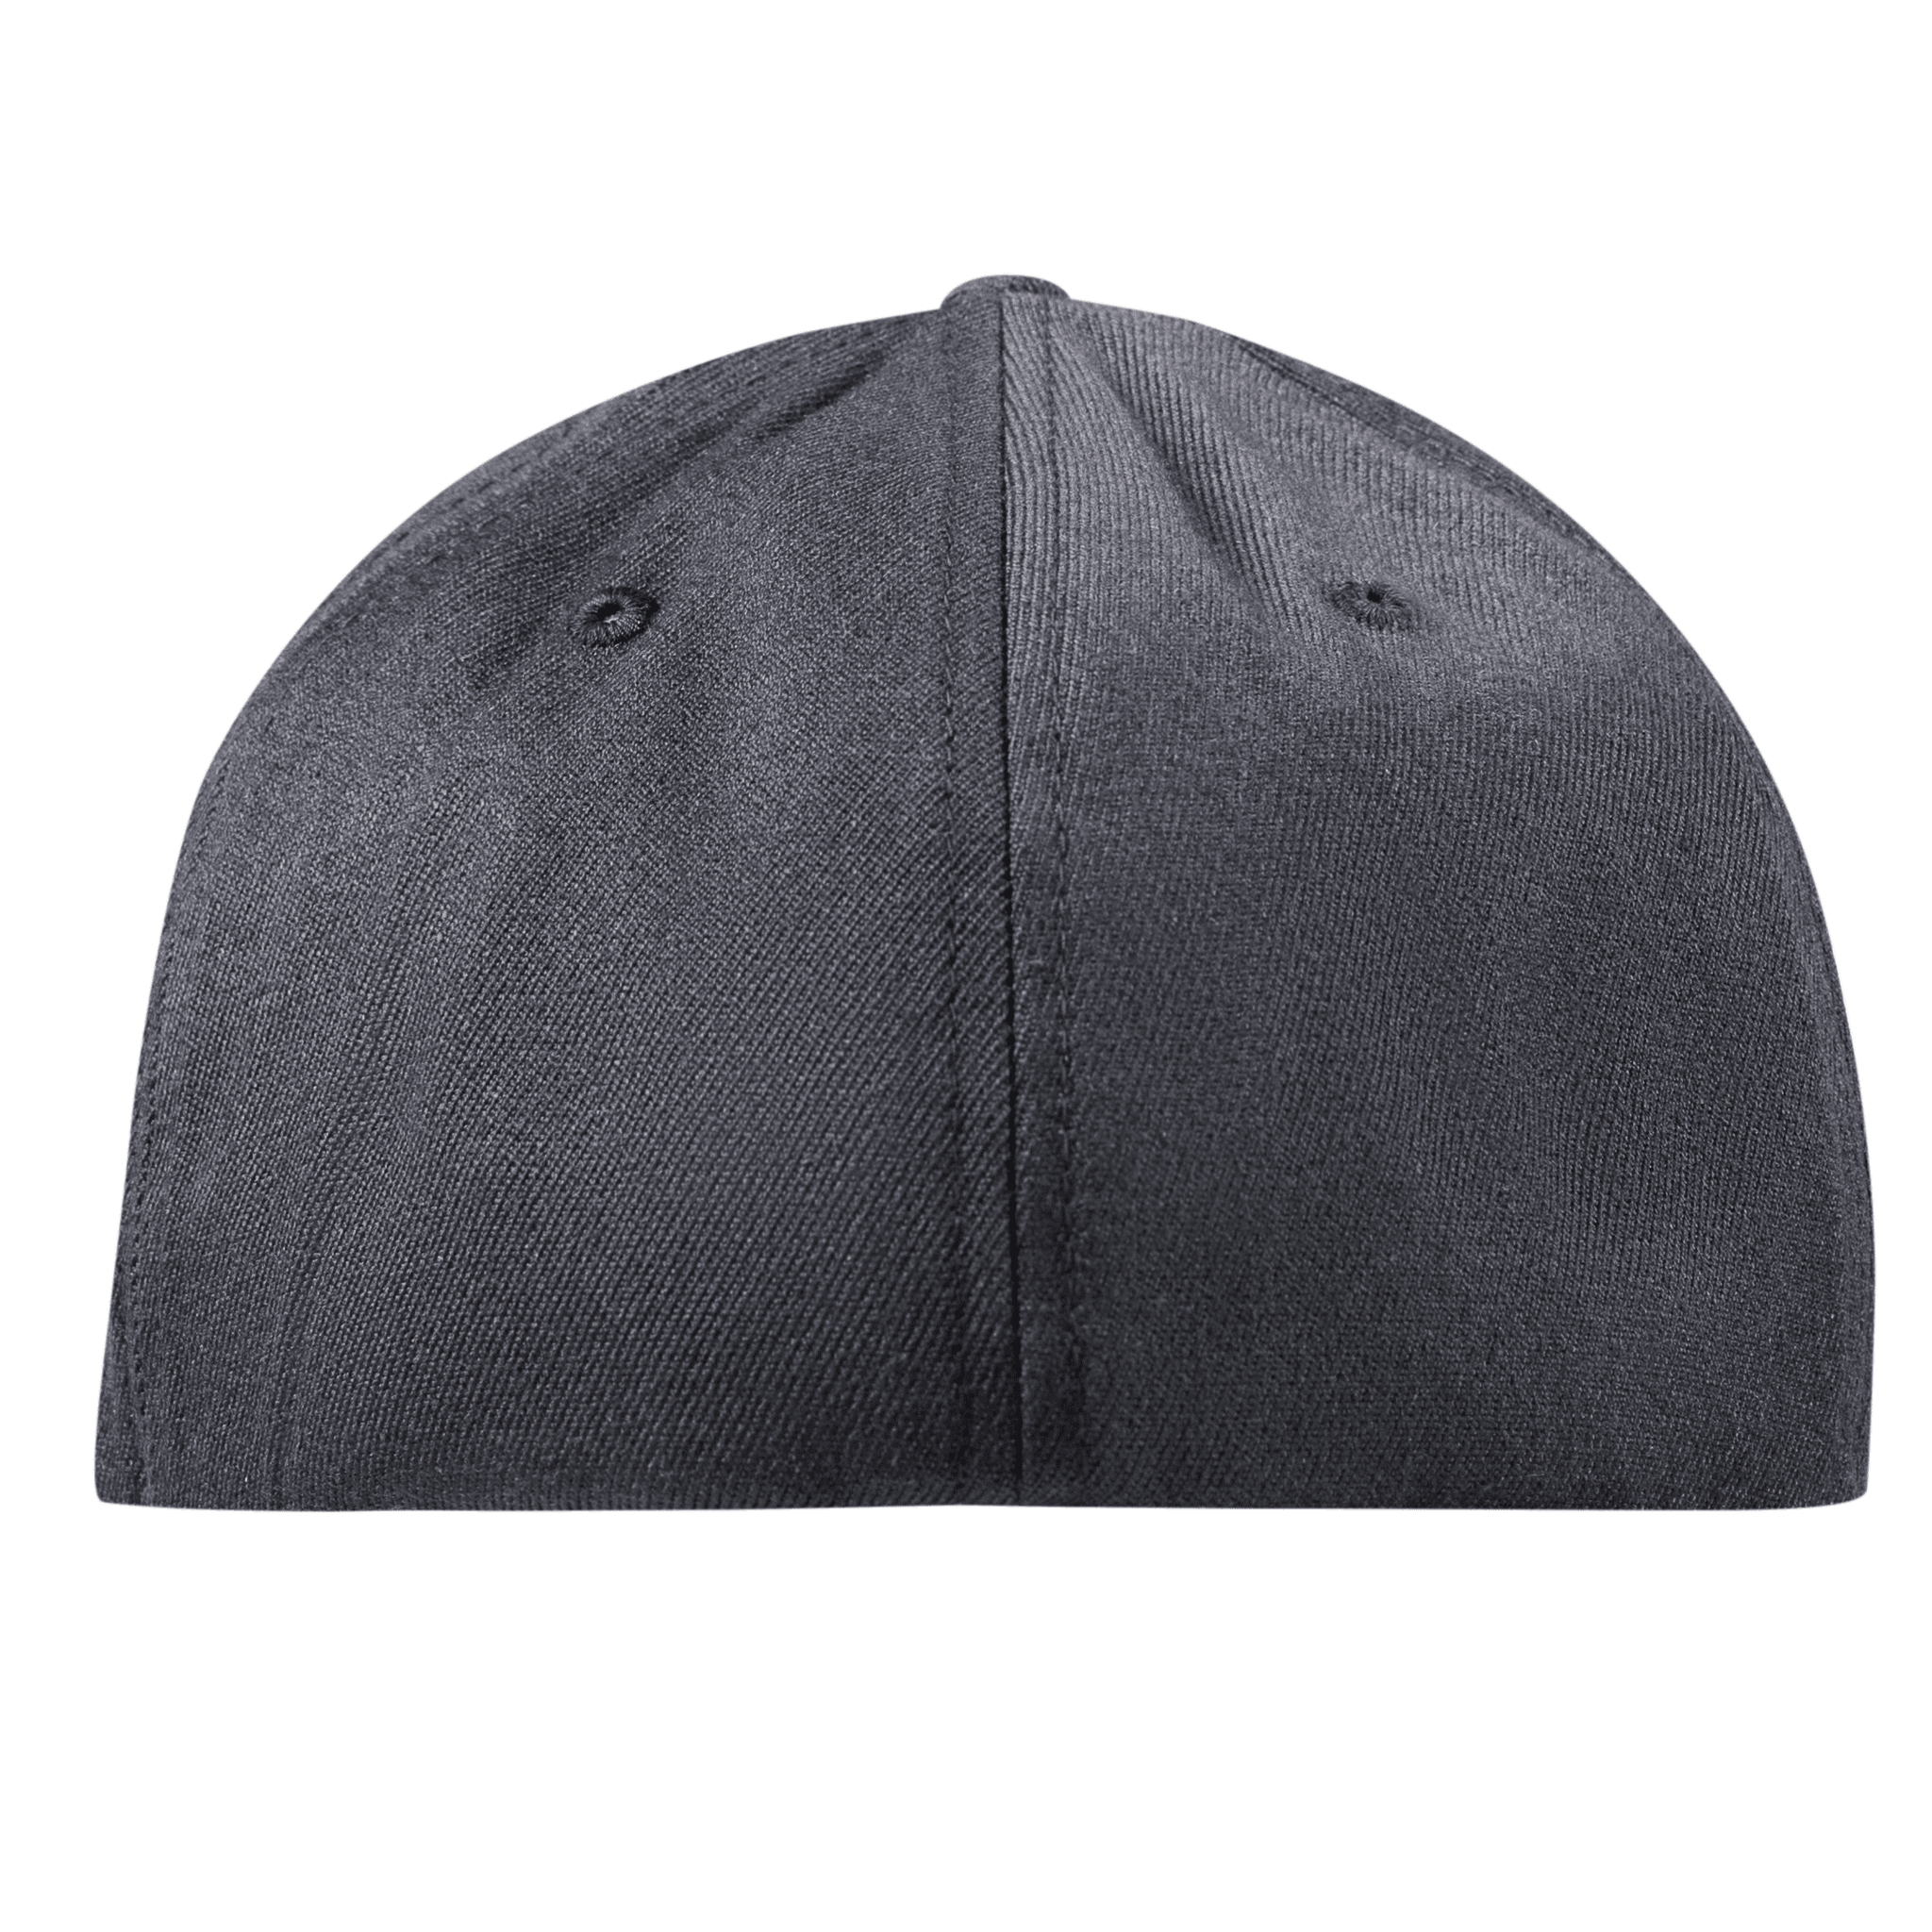 New Mexico Compass Flexfit Fitted Back Charcoal